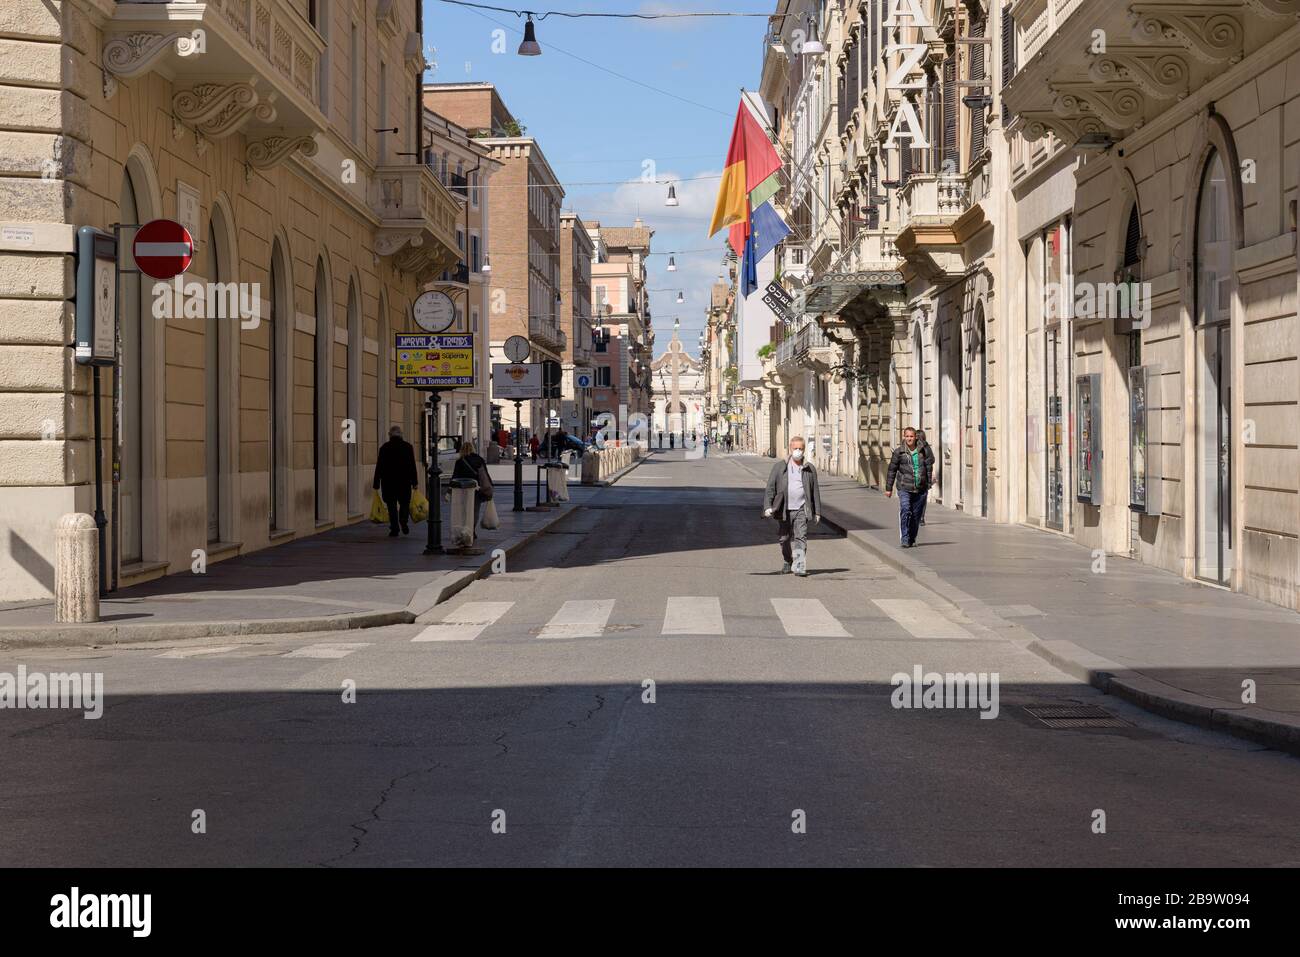 ROME, ITALY - 12 March 2020: A man with a face mask walks down Via del Corso amongst few passersby, Rome, Italy, following the nationwide coronavirus Stock Photo